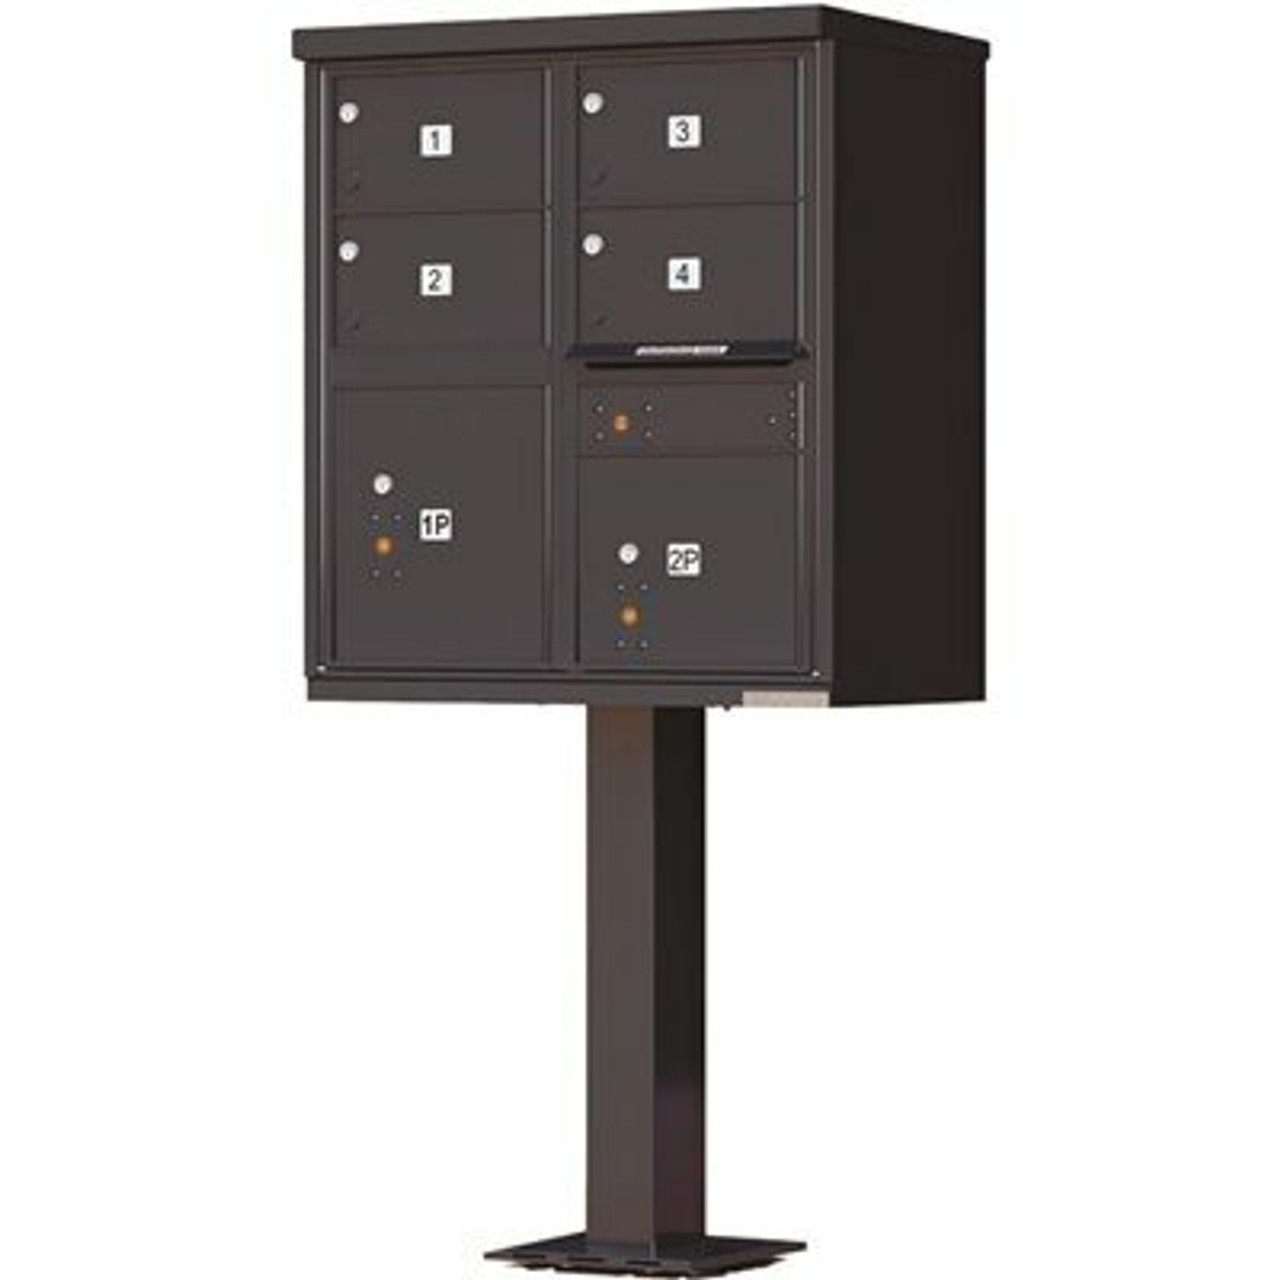 Florence 1570 Series 4-Large Mailboxes, 1-Outgoing Compartment, 2-Parcel Lockers, Vital Cluster Box Unit - 2474372